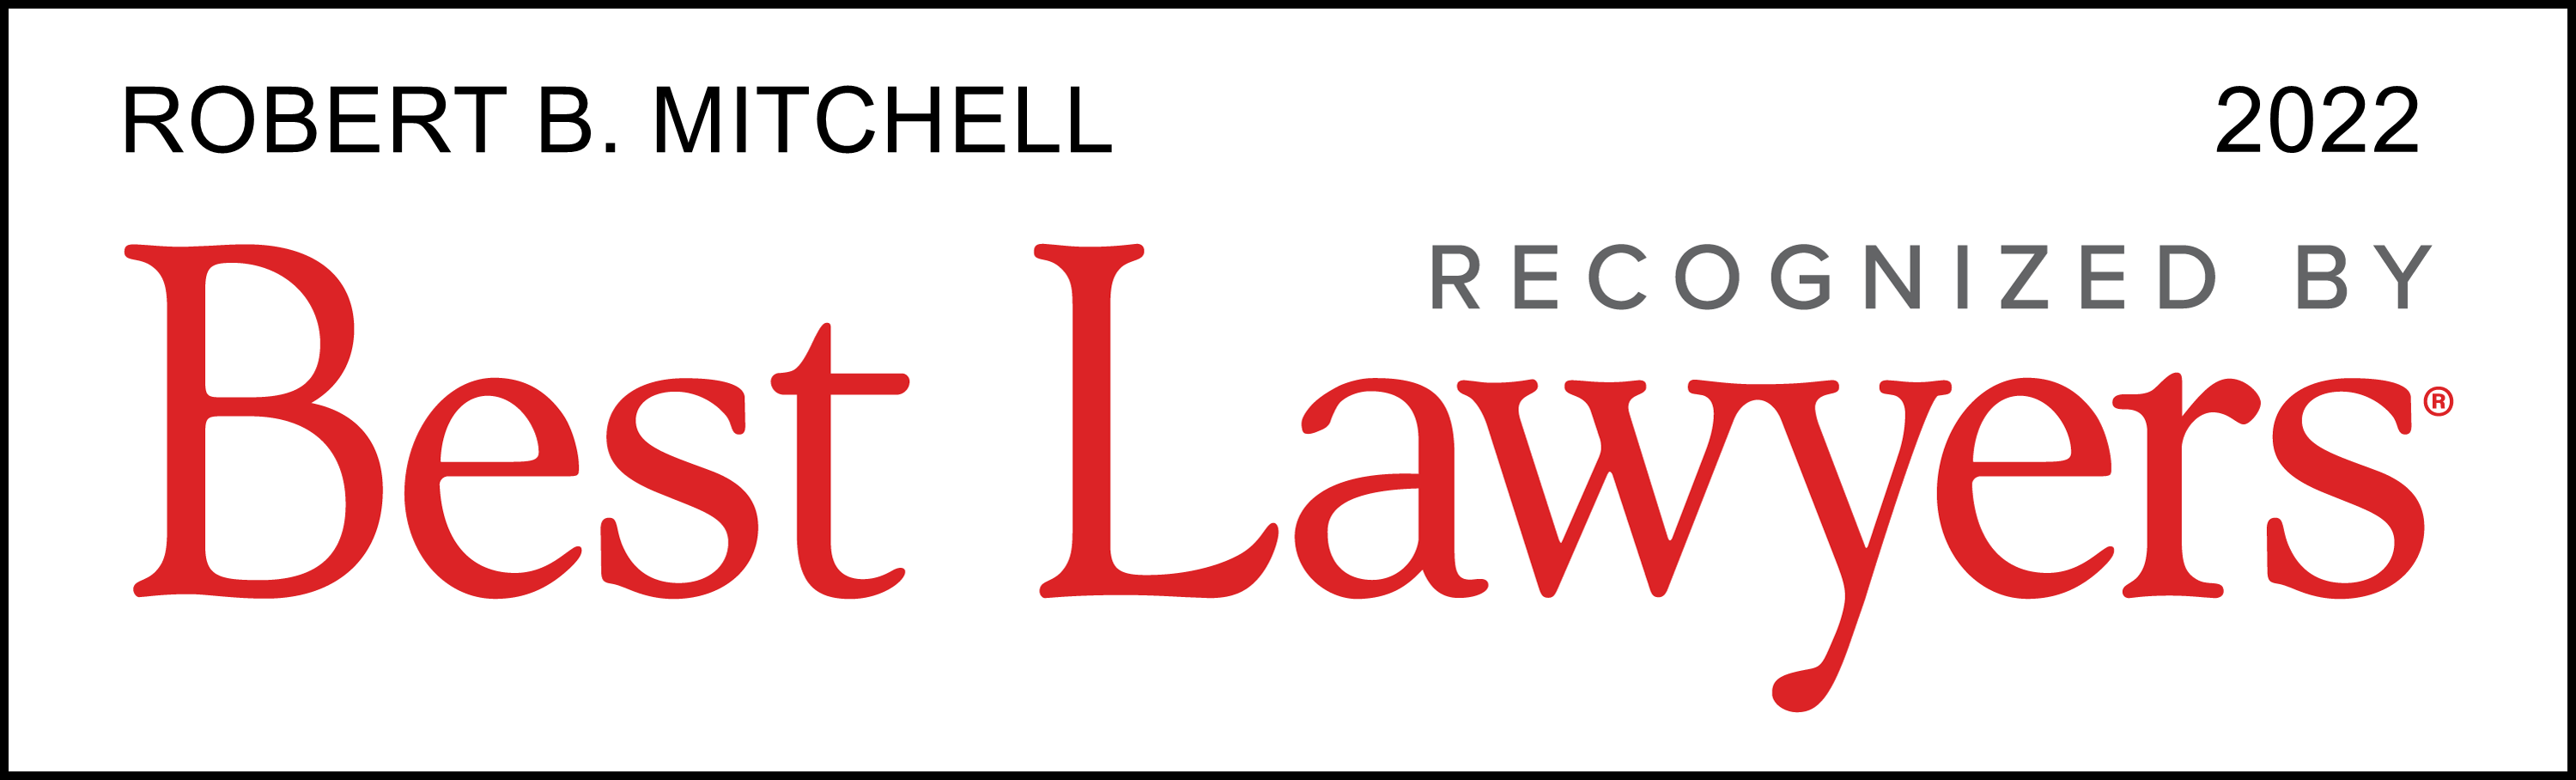 Robert B. Mitchell | 2022 | Recognized By Best Lawyers